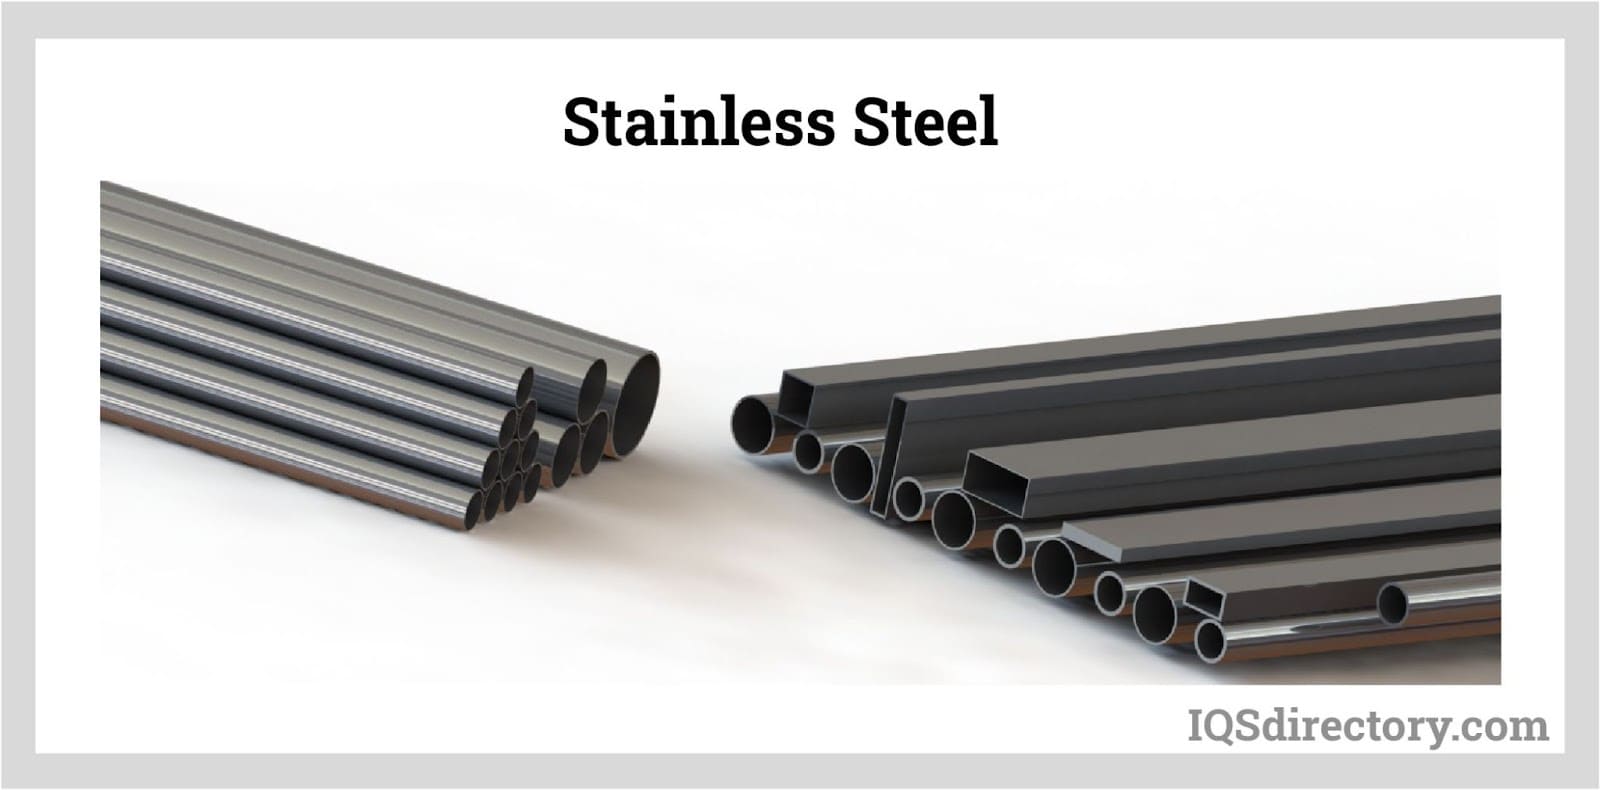 Premium Stainless Steel Materials and Processing